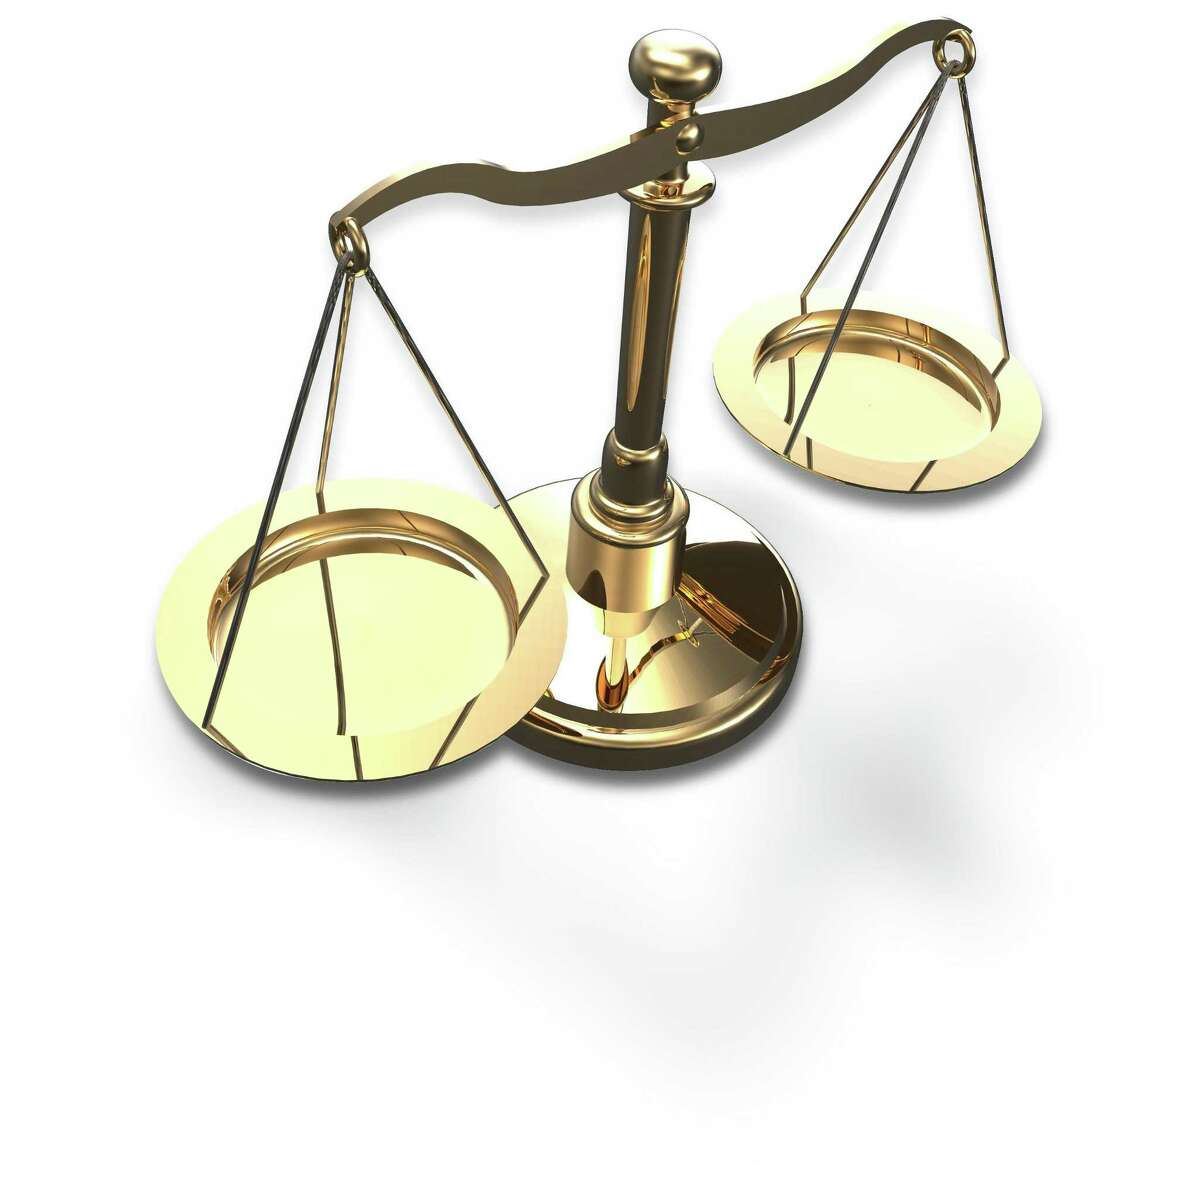 Scales as symbol of law justice court fairness choice 3D render with clipping path